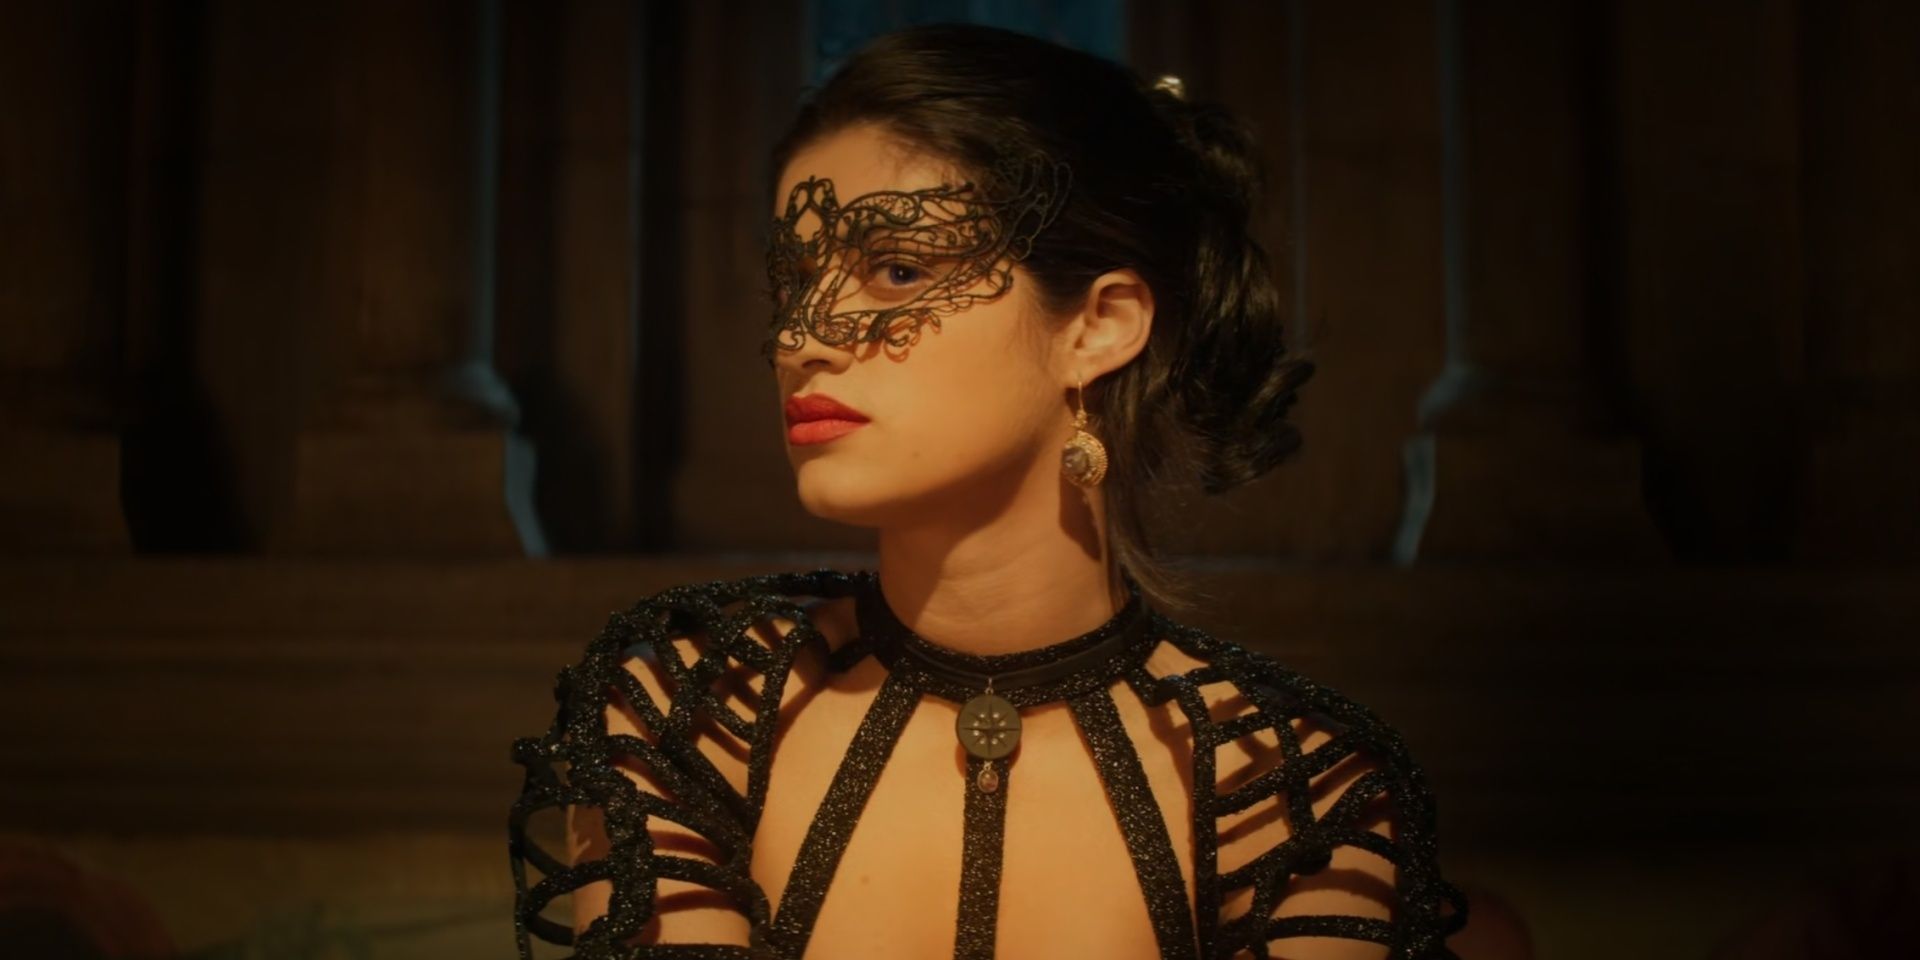 Yennefer in a mask in The Witcher